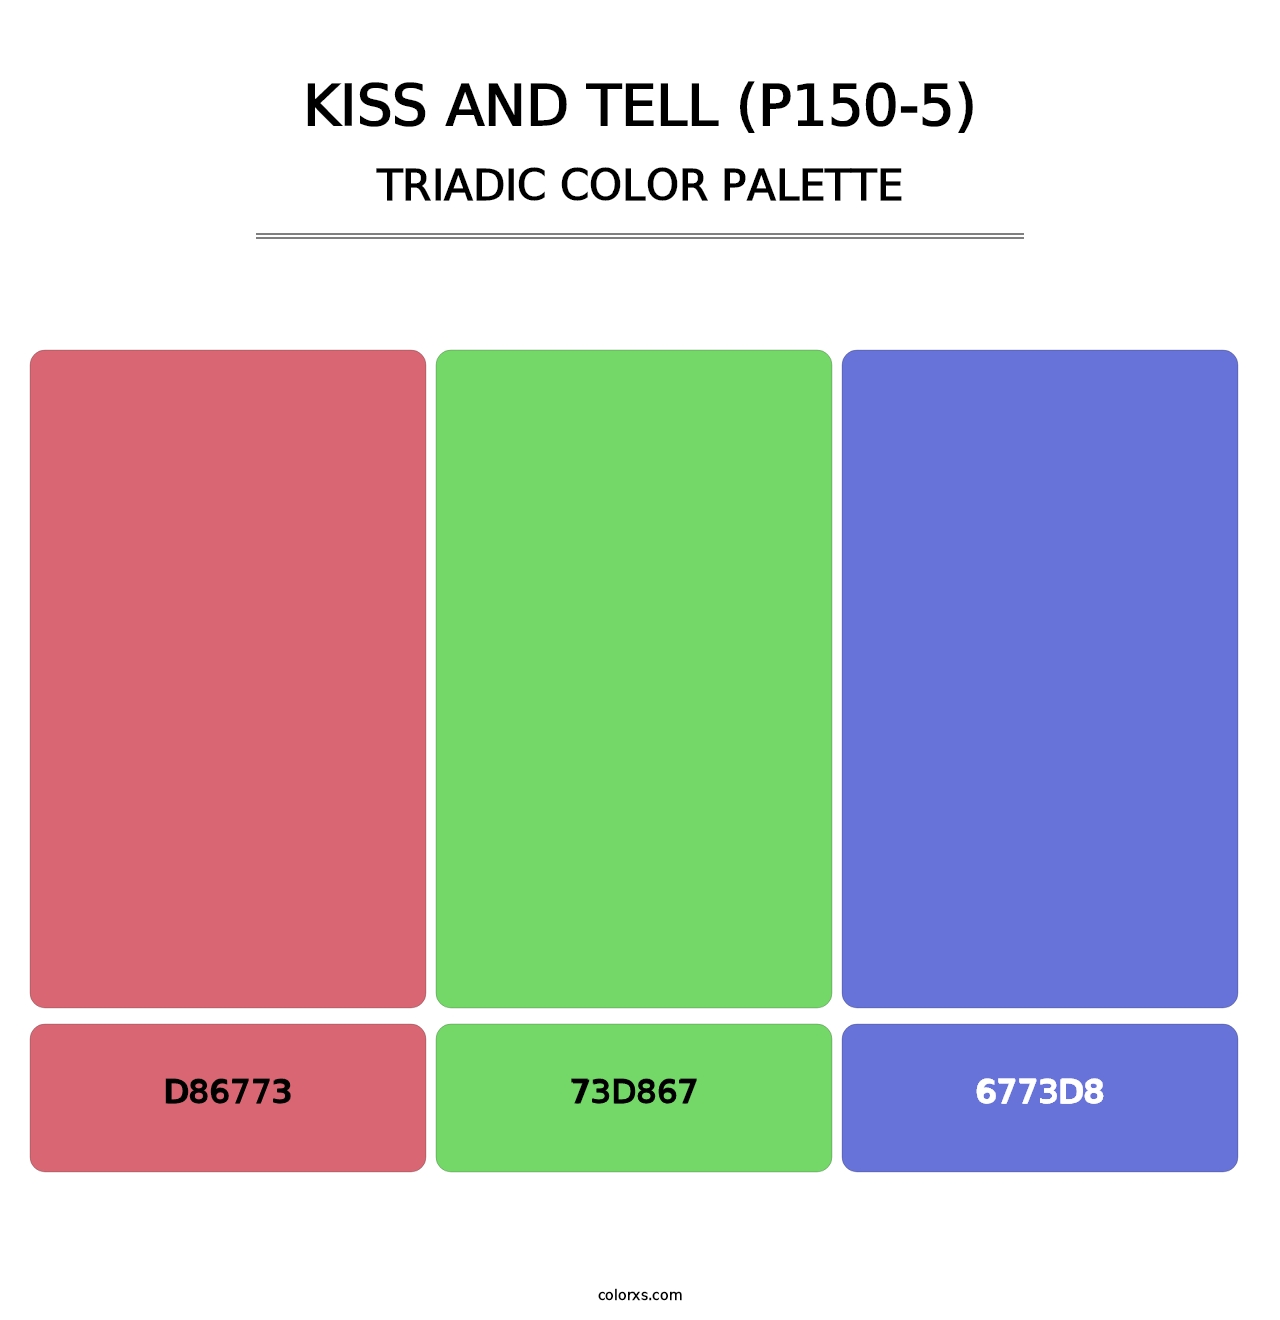 Kiss And Tell (P150-5) - Triadic Color Palette